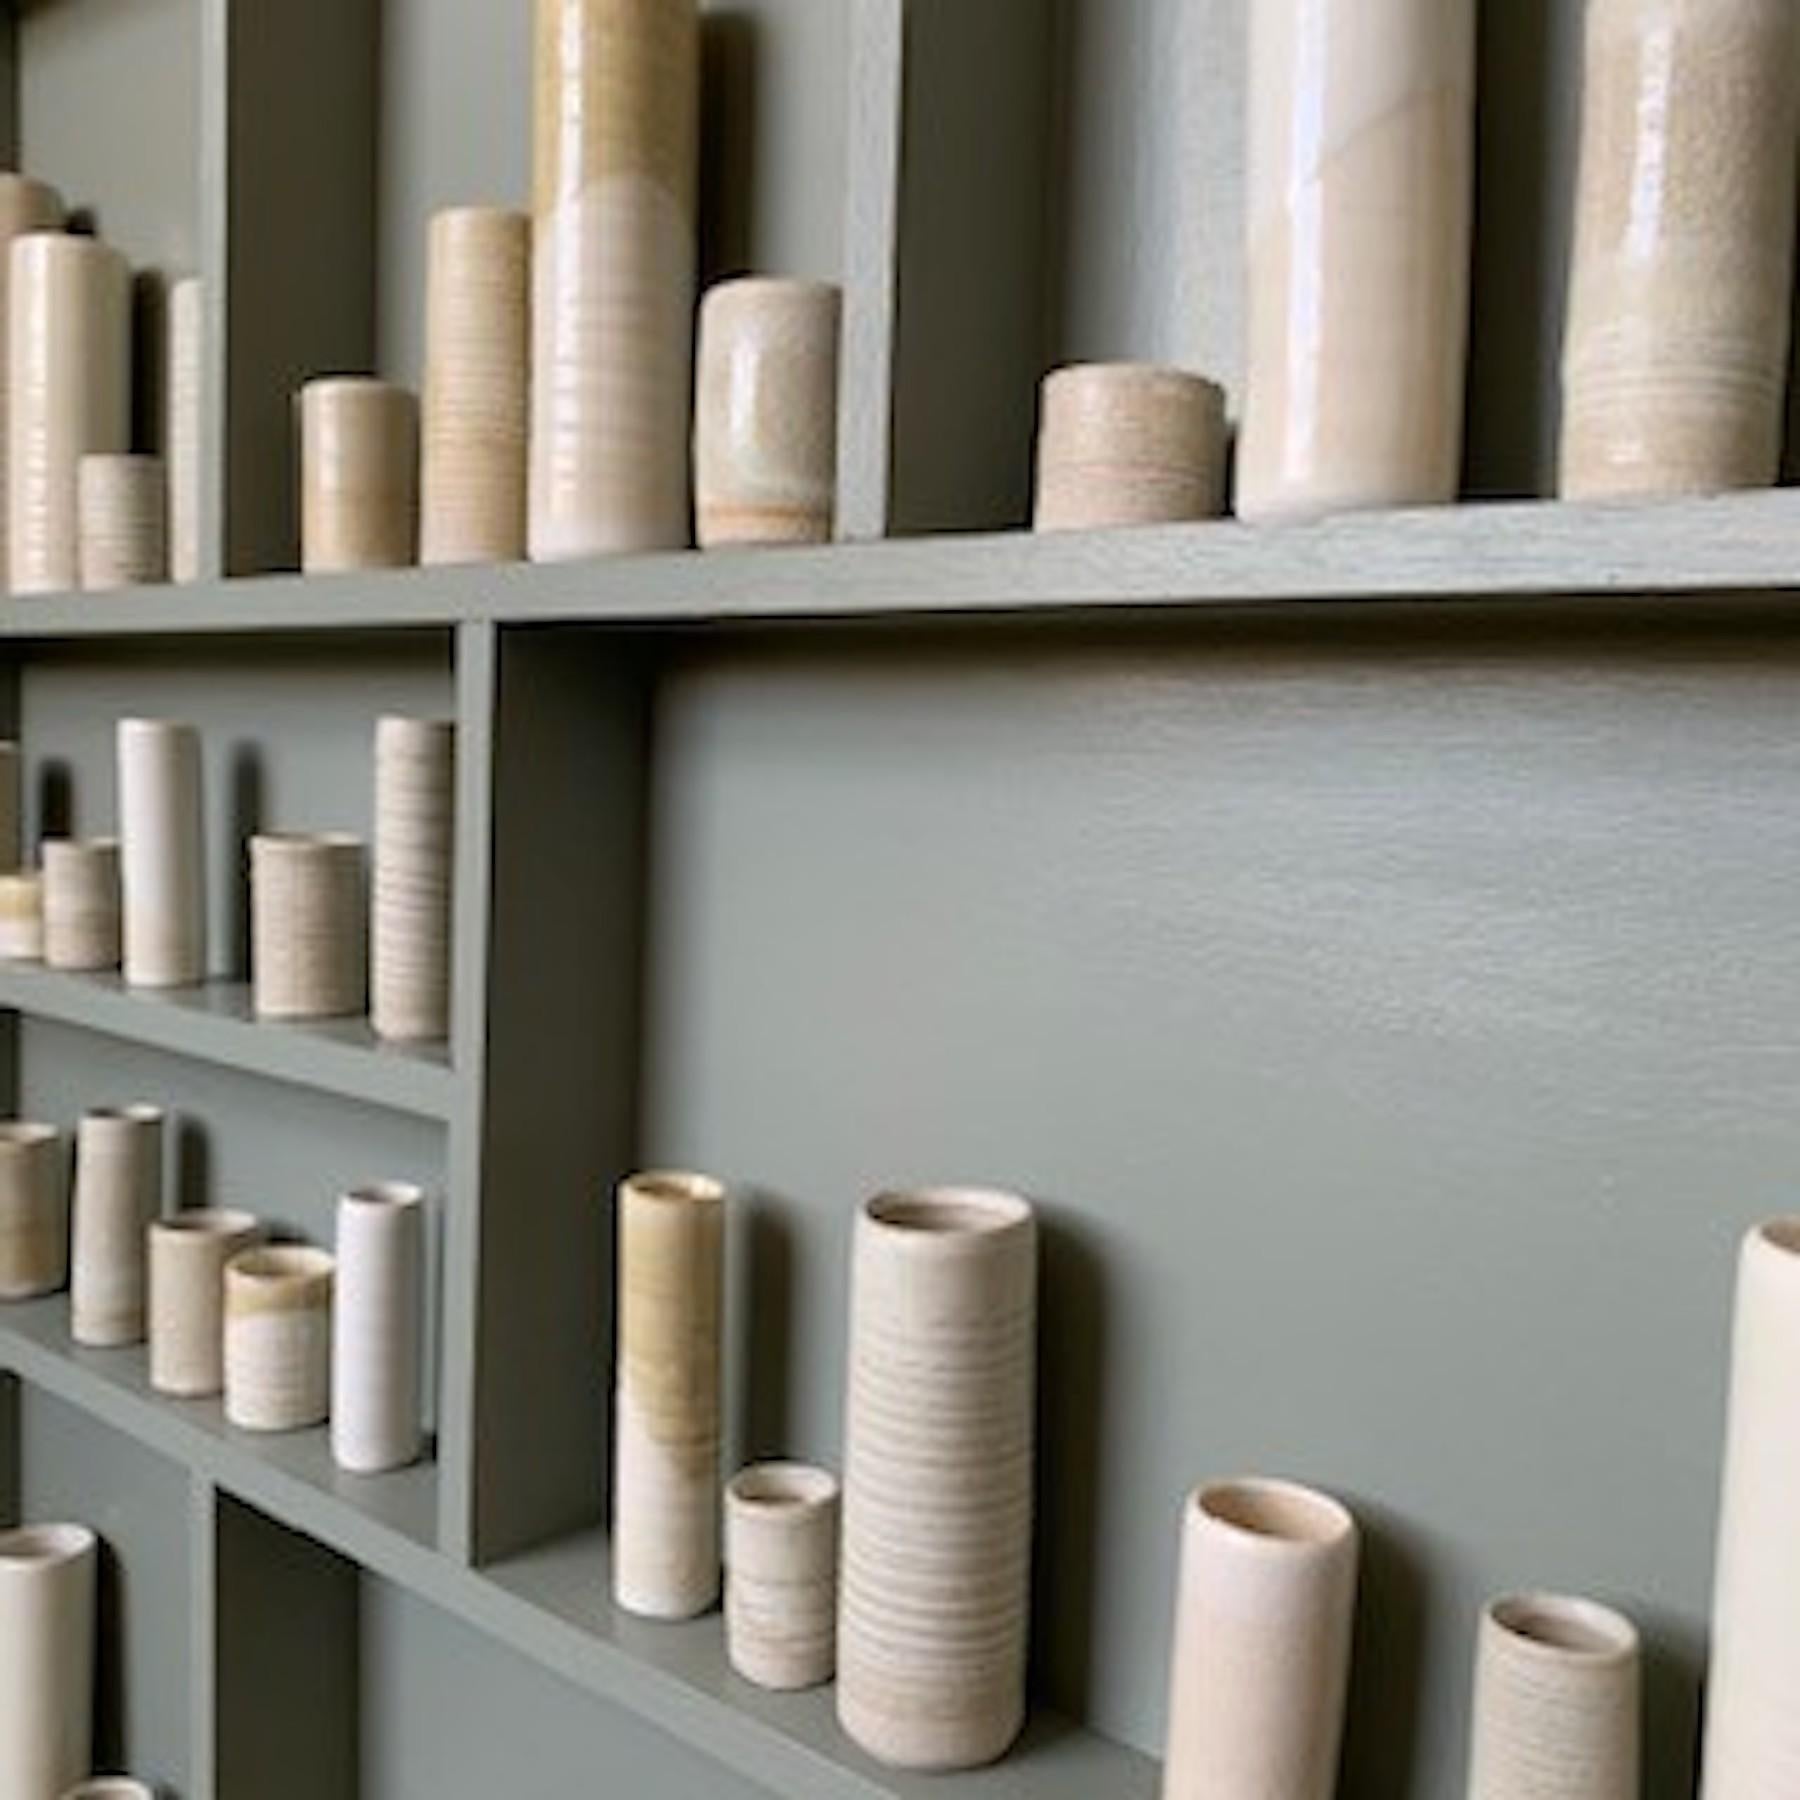 Emma Bell’s ceramic and porcelain Pot Frame – Installation Piece.
Emma Bell says: “This piece is inspired by my glaze test vessels. As a potter, I am always staggered by how different the same/similar glaze turns out on different clay bodies when it